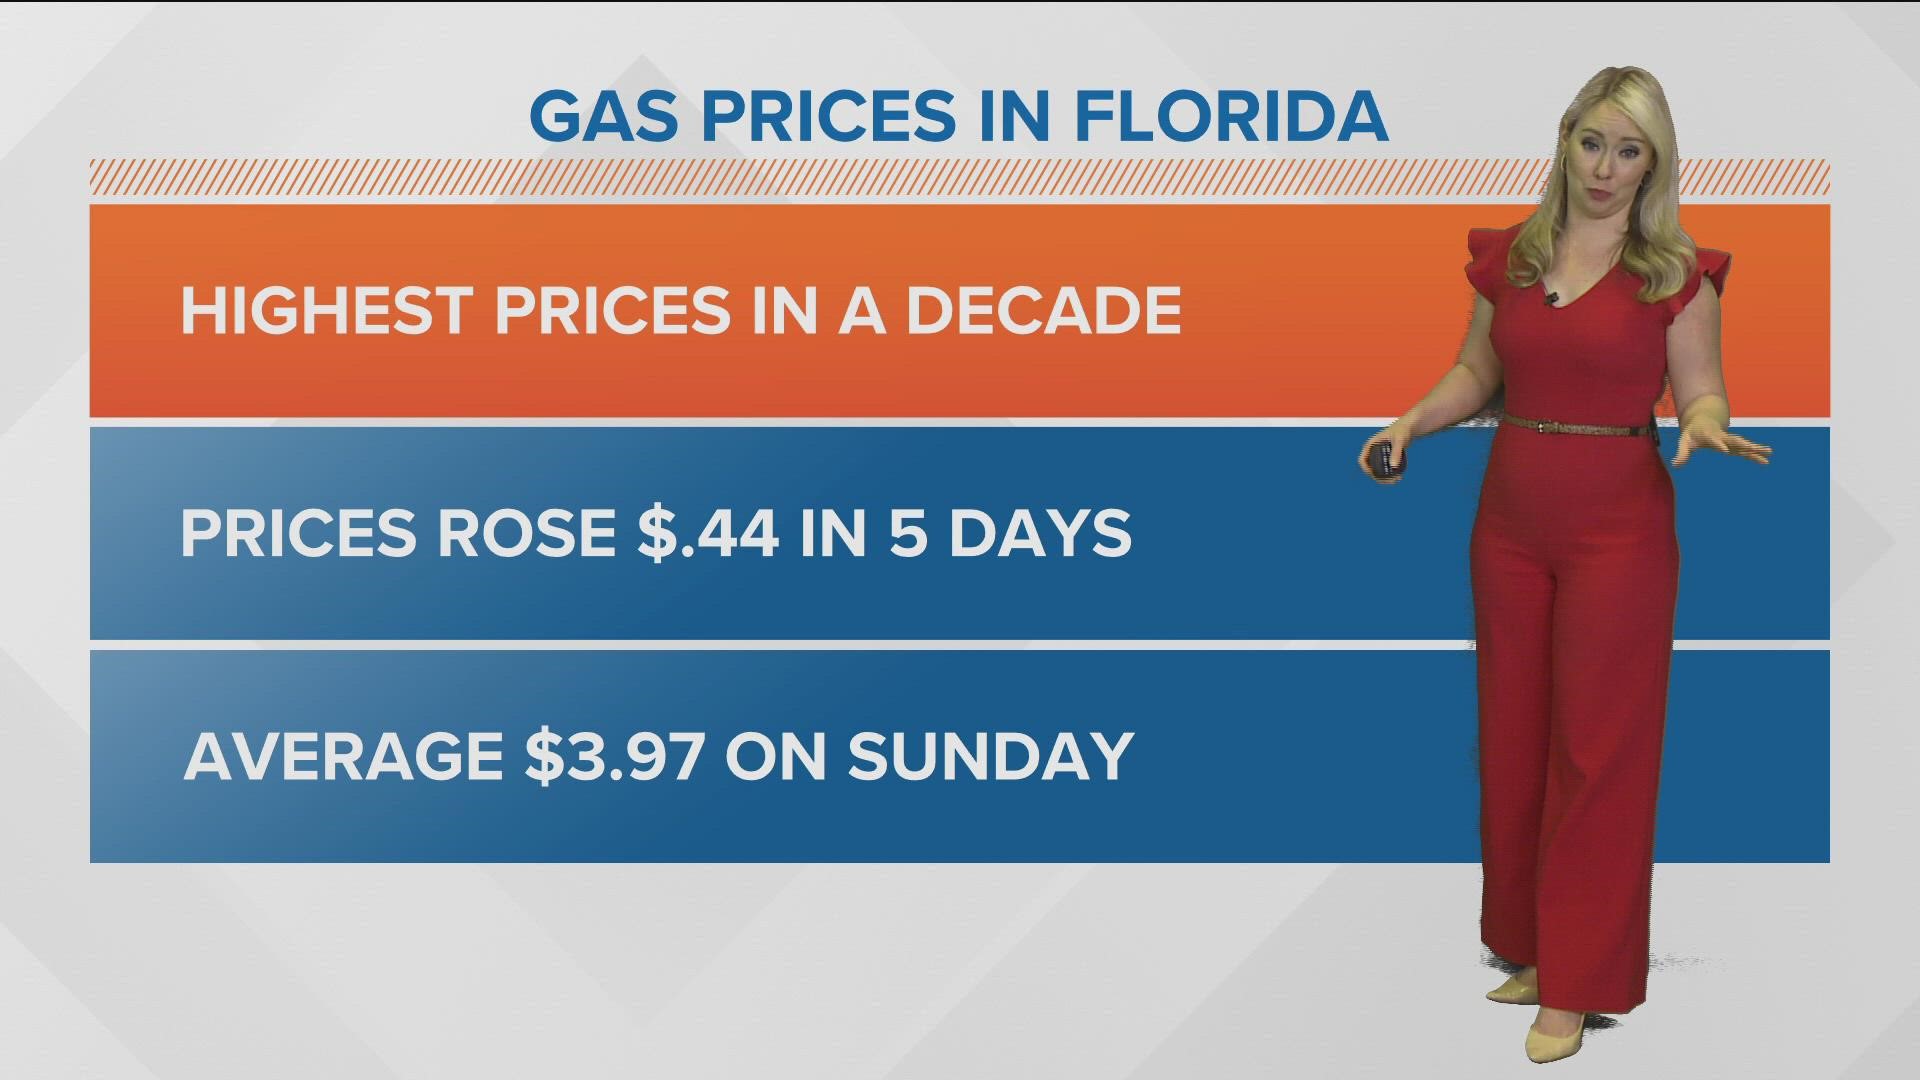 If you're able to pay cash for your gas, there's a chance you could save some money at the pump.